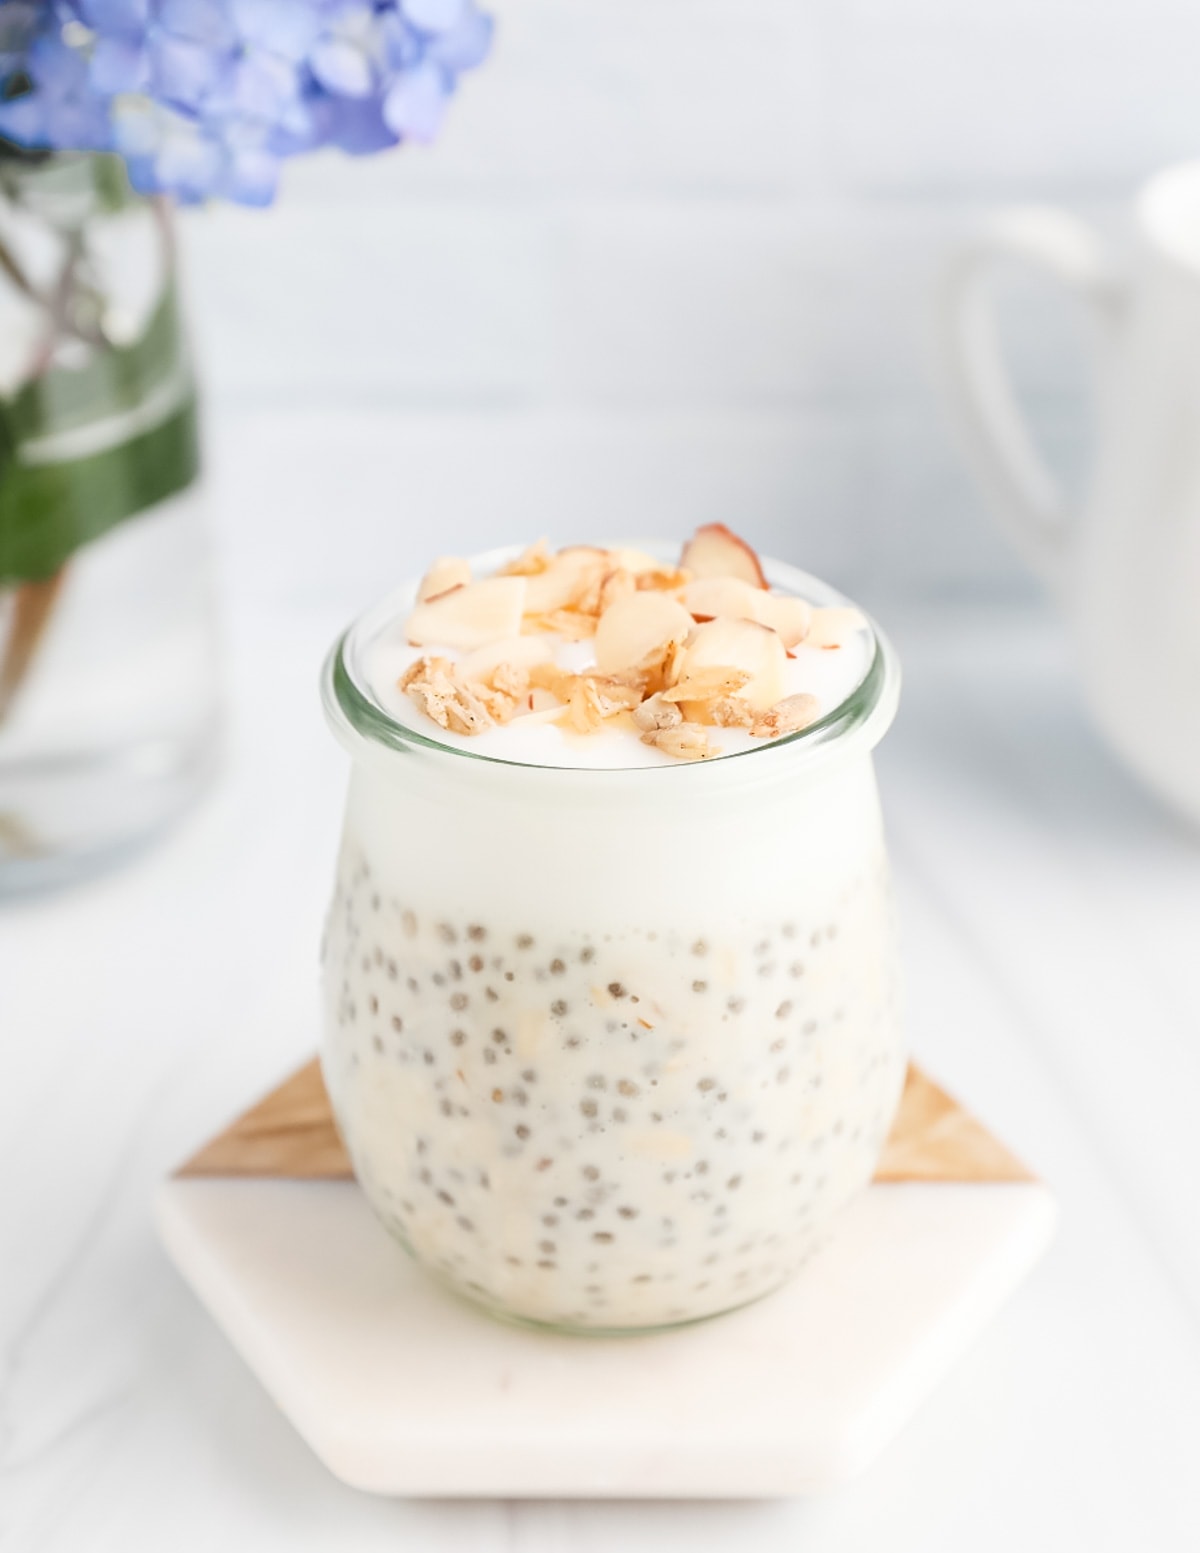 Overnight oats and yogurt in a clear cup. They are garnished with nuts and granola.